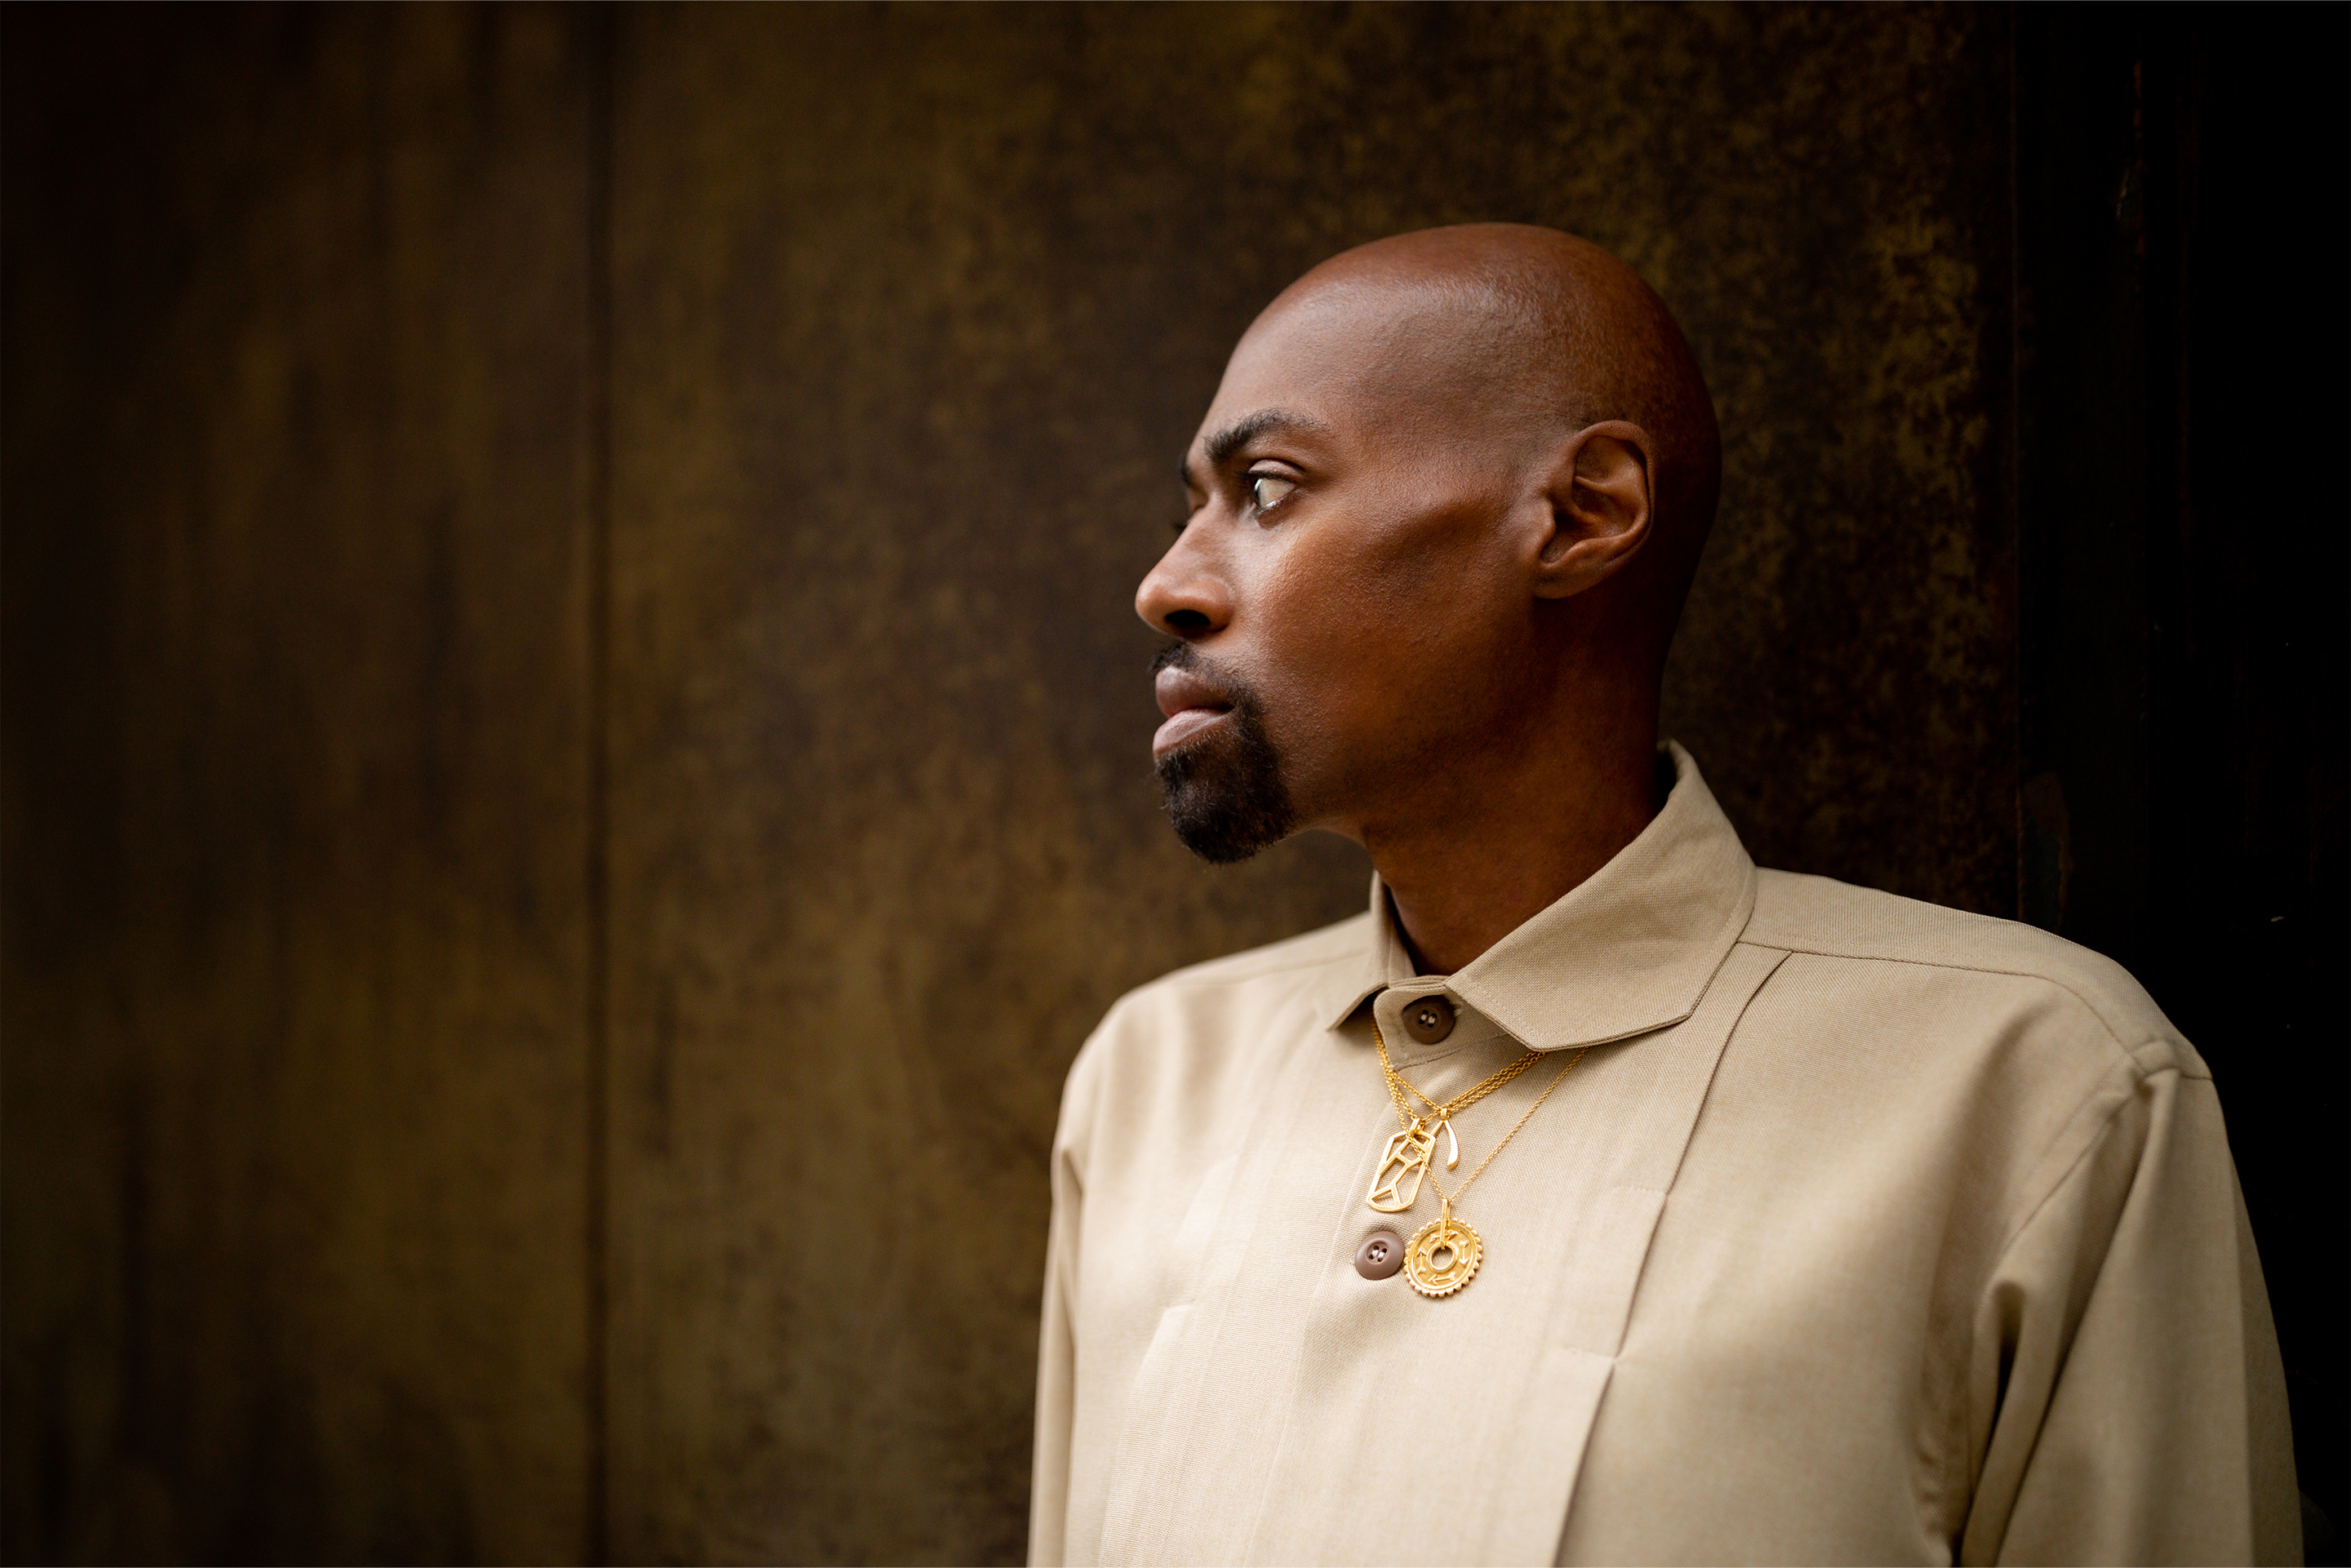 Henry Edwards II is wearing Auvere 22 and 24 karat gold jewelry